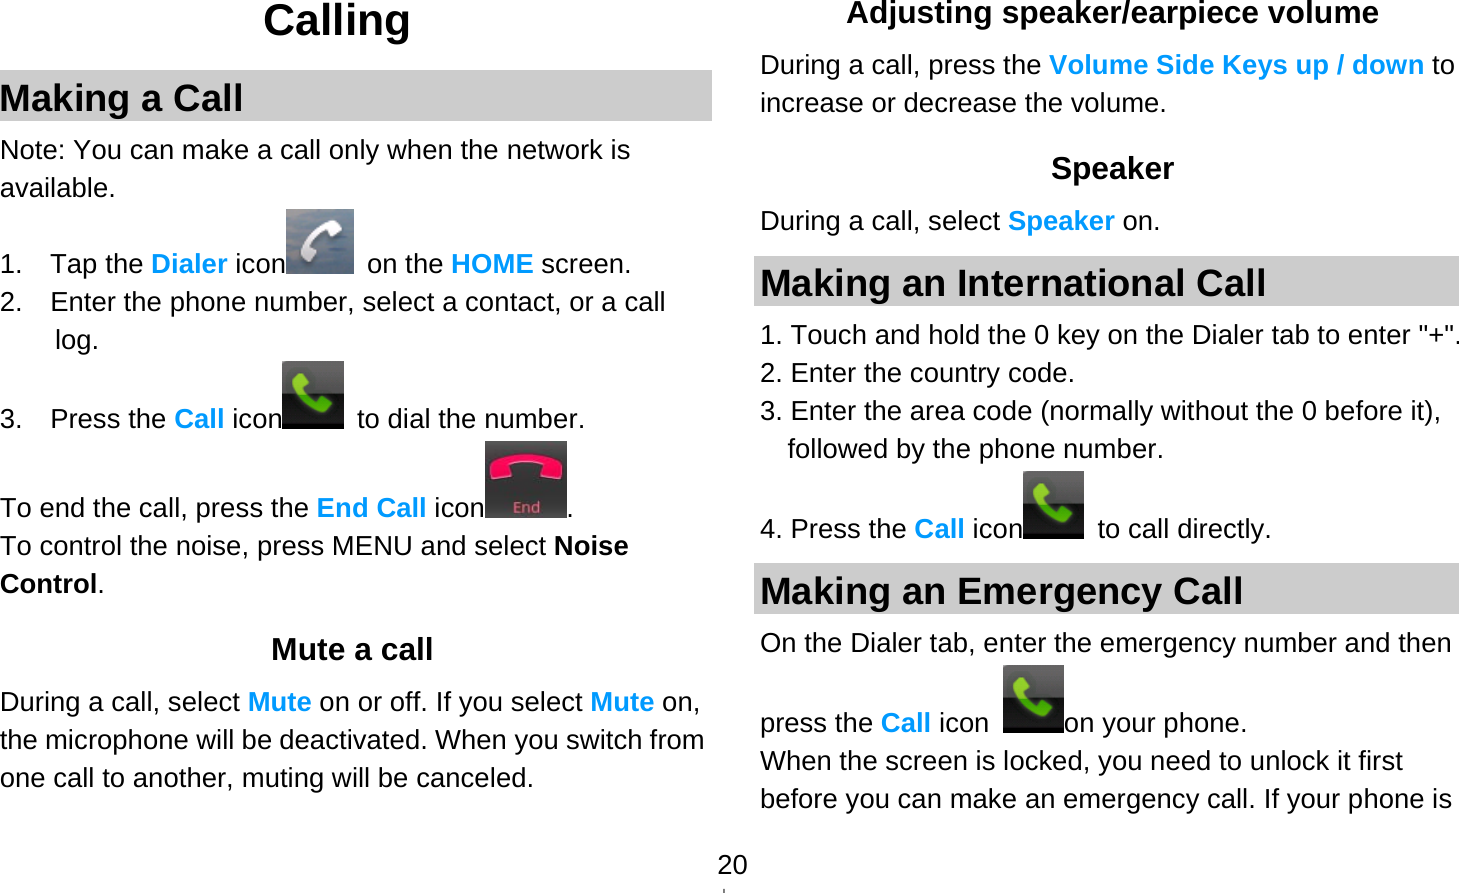   20Calling Making a Call Note: You can make a call only when the network is available. 1.  Tap the Dialer icon  on the HOME screen. 2.    Enter the phone number, select a contact, or a call log. 3.  Press the Call icon   to dial the number. To end the call, press the End Call icon . To control the noise, press MENU and select Noise Control.  Mute a call During a call, select Mute on or off. If you select Mute on, the microphone will be deactivated. When you switch from one call to another, muting will be canceled. Adjusting speaker/earpiece volume During a call, press the Volume Side Keys up / down to increase or decrease the volume. Speaker During a call, select Speaker on. Making an International Call 1. Touch and hold the 0 key on the Dialer tab to enter &quot;+&quot;. 2. Enter the country code. 3. Enter the area code (normally without the 0 before it), followed by the phone number. 4. Press the Call icon  to call directly. Making an Emergency Call On the Dialer tab, enter the emergency number and then press the Call icon  on your phone. When the screen is locked, you need to unlock it first before you can make an emergency call. If your phone is 